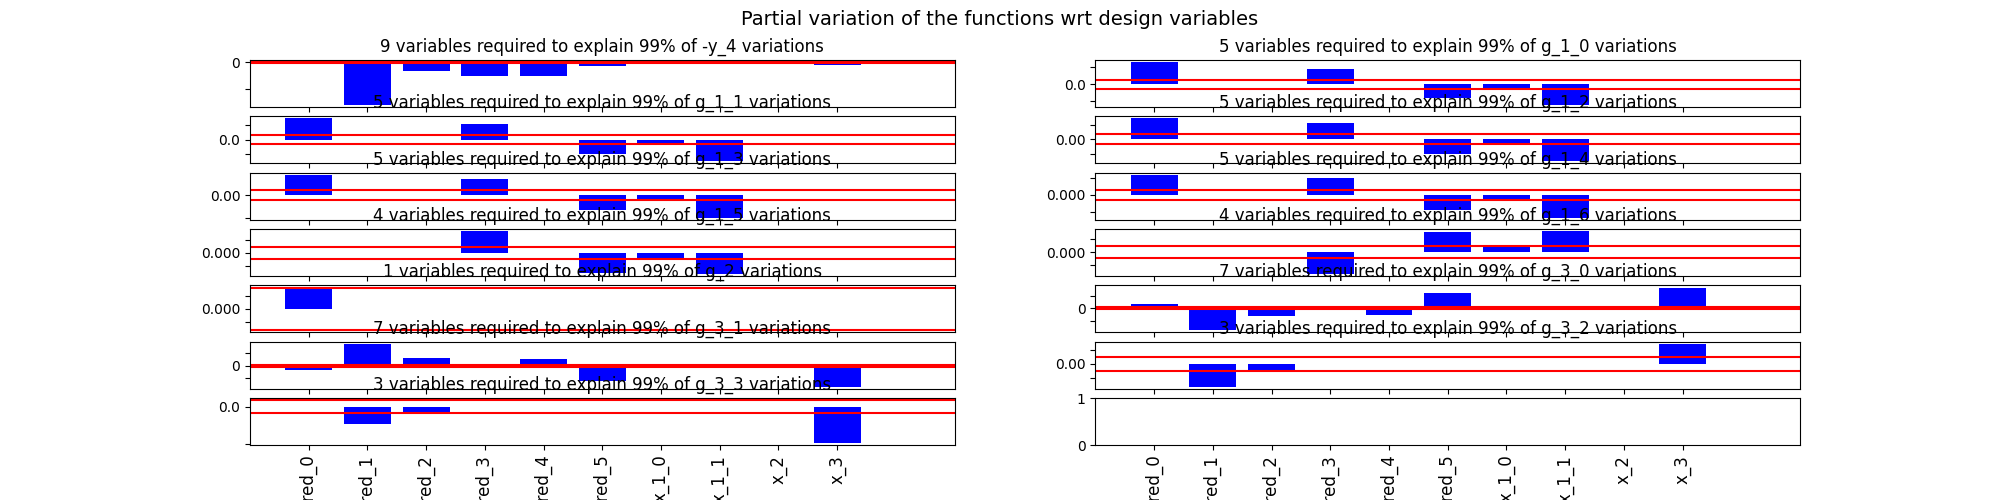 Partial variation of the functions wrt design variables, 9 variables required to explain 99% of -y_4 variations, 5 variables required to explain 99% of g_1_0 variations, 5 variables required to explain 99% of g_1_1 variations, 5 variables required to explain 99% of g_1_2 variations, 5 variables required to explain 99% of g_1_3 variations, 5 variables required to explain 99% of g_1_4 variations, 4 variables required to explain 99% of g_1_5 variations, 4 variables required to explain 99% of g_1_6 variations, 1 variables required to explain 99% of g_2 variations, 7 variables required to explain 99% of g_3_0 variations, 7 variables required to explain 99% of g_3_1 variations, 3 variables required to explain 99% of g_3_2 variations, 3 variables required to explain 99% of g_3_3 variations